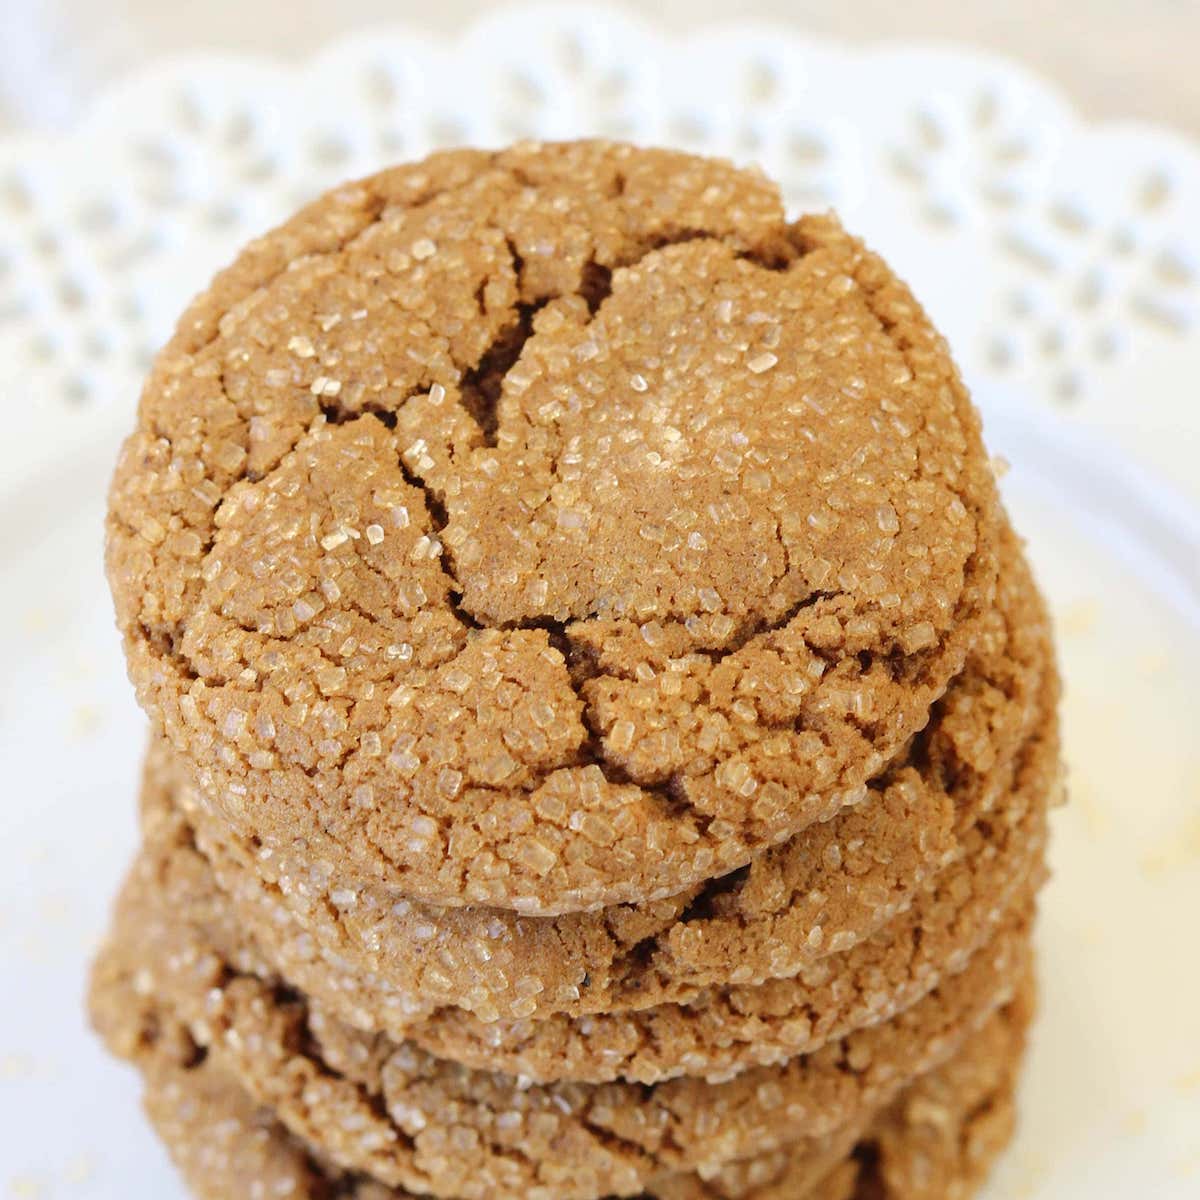 Molasses Spice Cookies stacked on white lace plate.